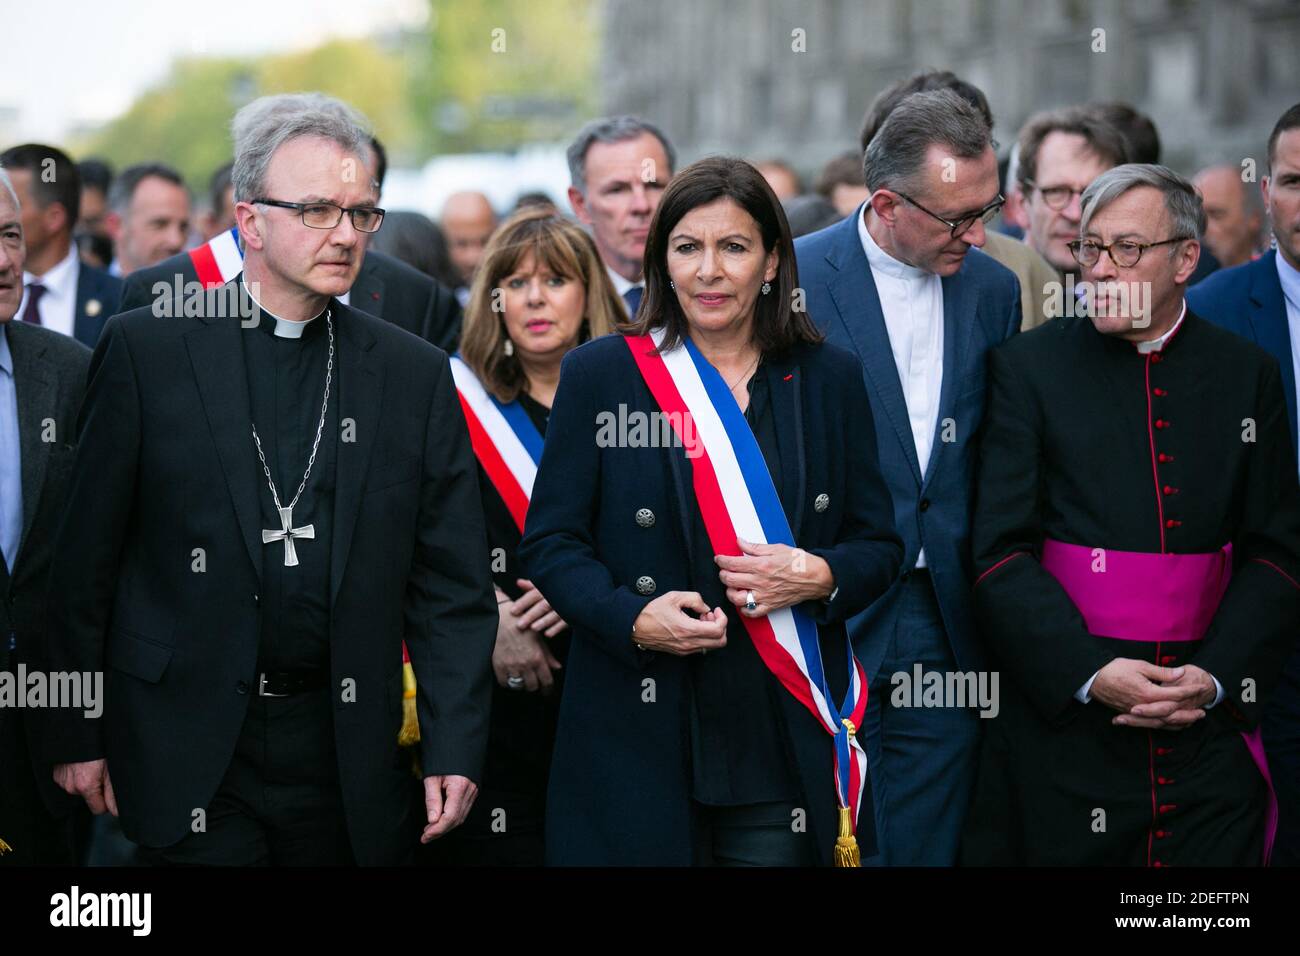 Paris mayor Anne Hidalgo and outside Notre Dame cathedral after a ceremony at the city town hall on April 18, 2019 in Paris. France paid a daylong tribute on April 18, 2019 to the Paris firefighters who saved Notre Dame Cathedral from collapse, while construction workers rushed to secure an area above one of the church's famed rose-shaped windows and other vulnerable sections of the fire-damaged landmark. Photo by Pierre Gautheron/ABACAPRESS.COM Stock Photo